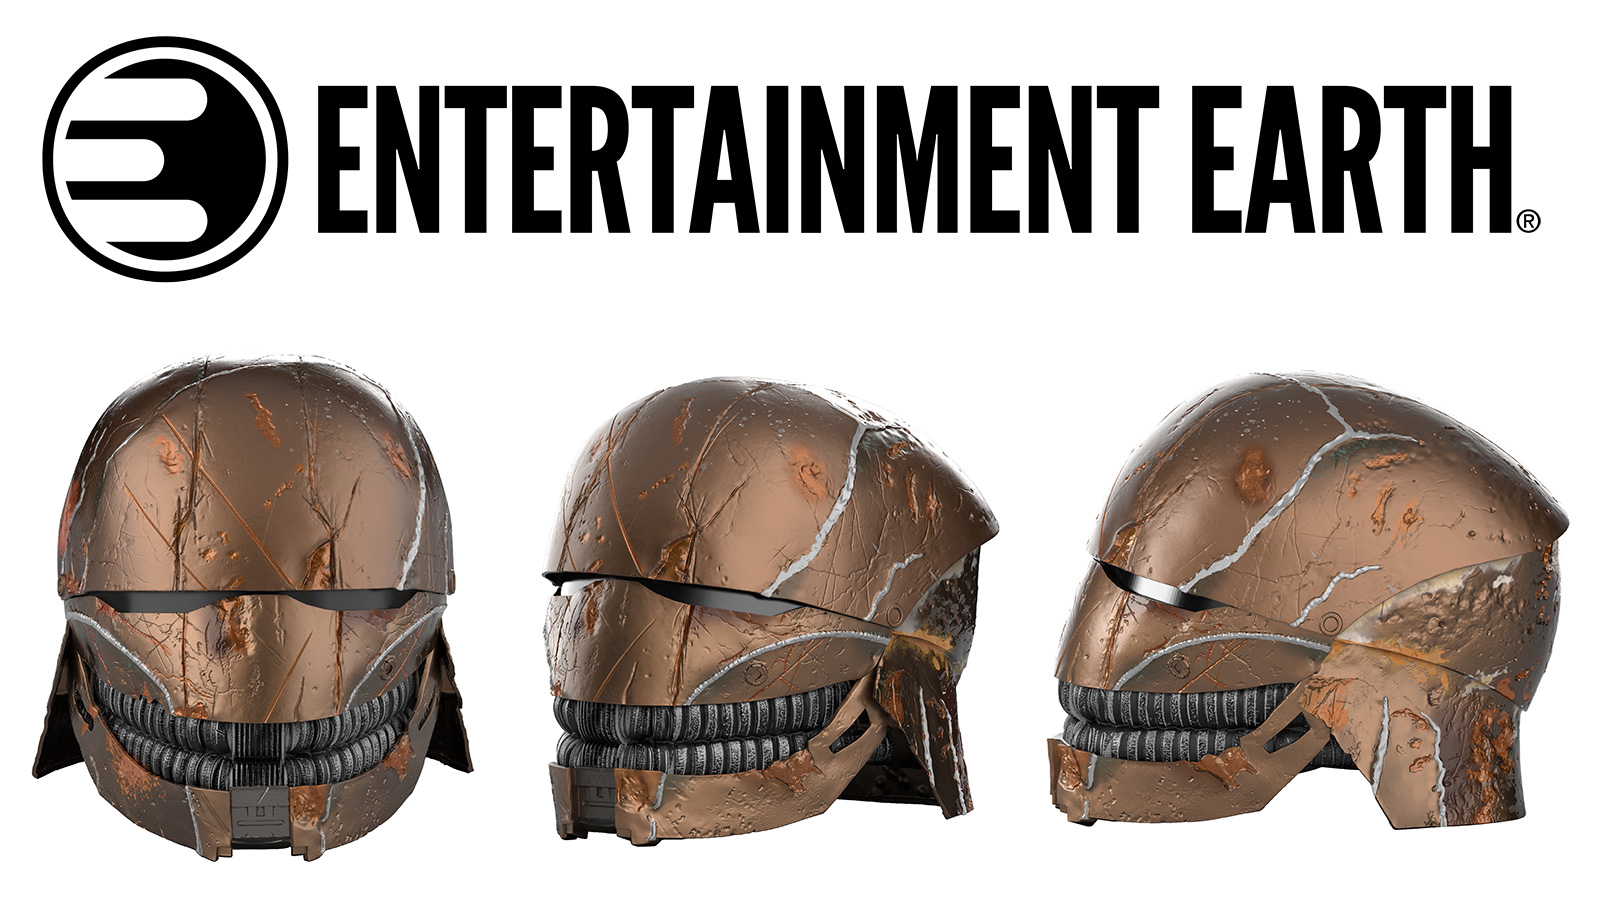 Preorder Now At Entertainment Earth - The Black Series The Stranger Helmet